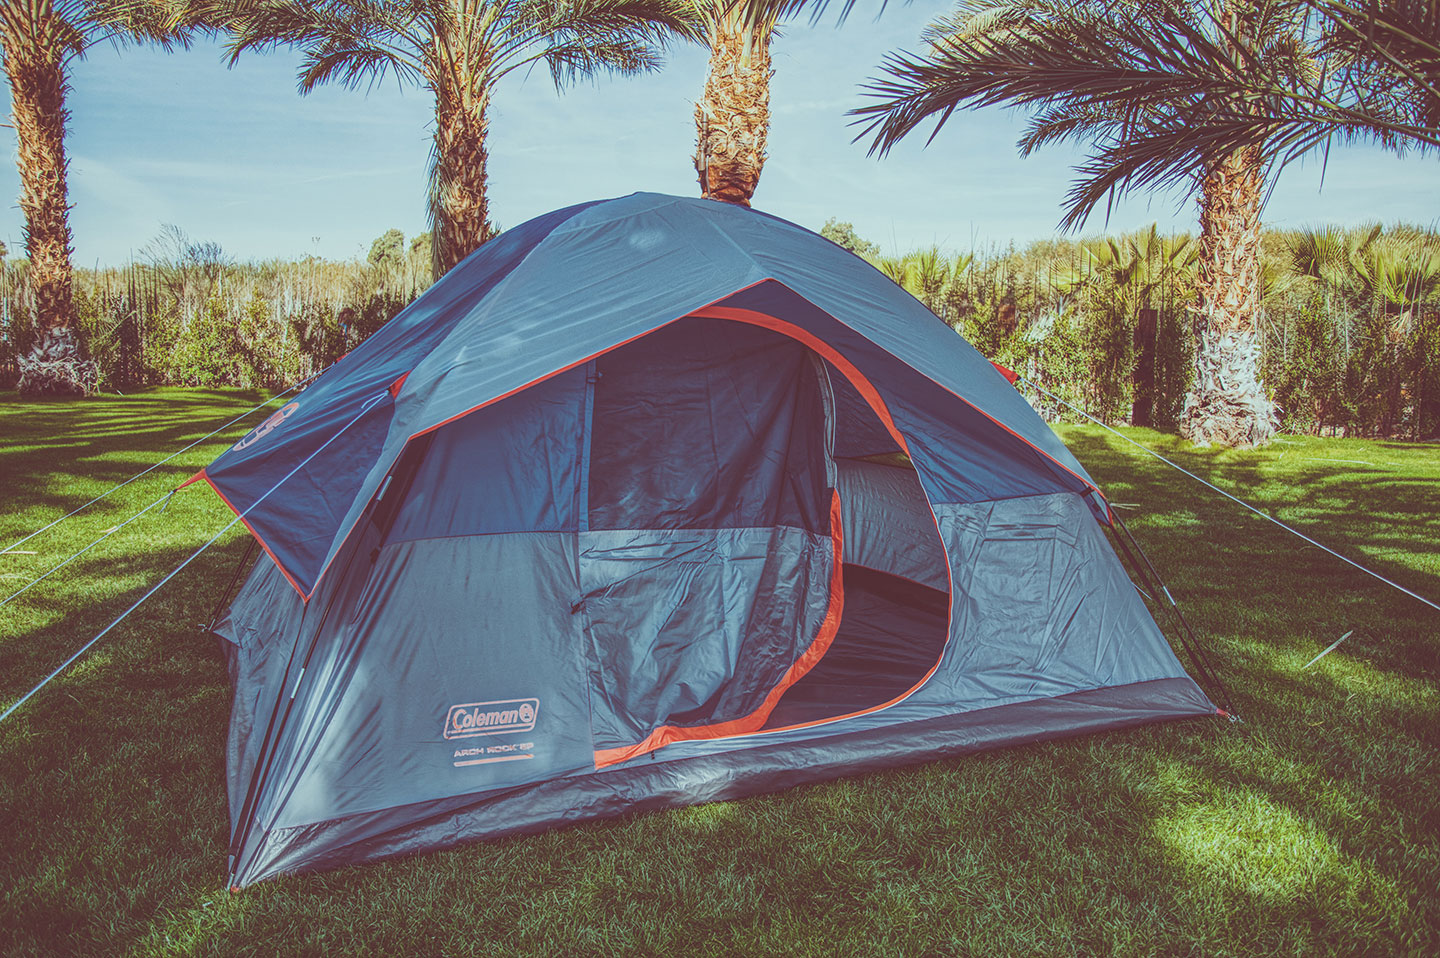 BYO Tent on GRASS